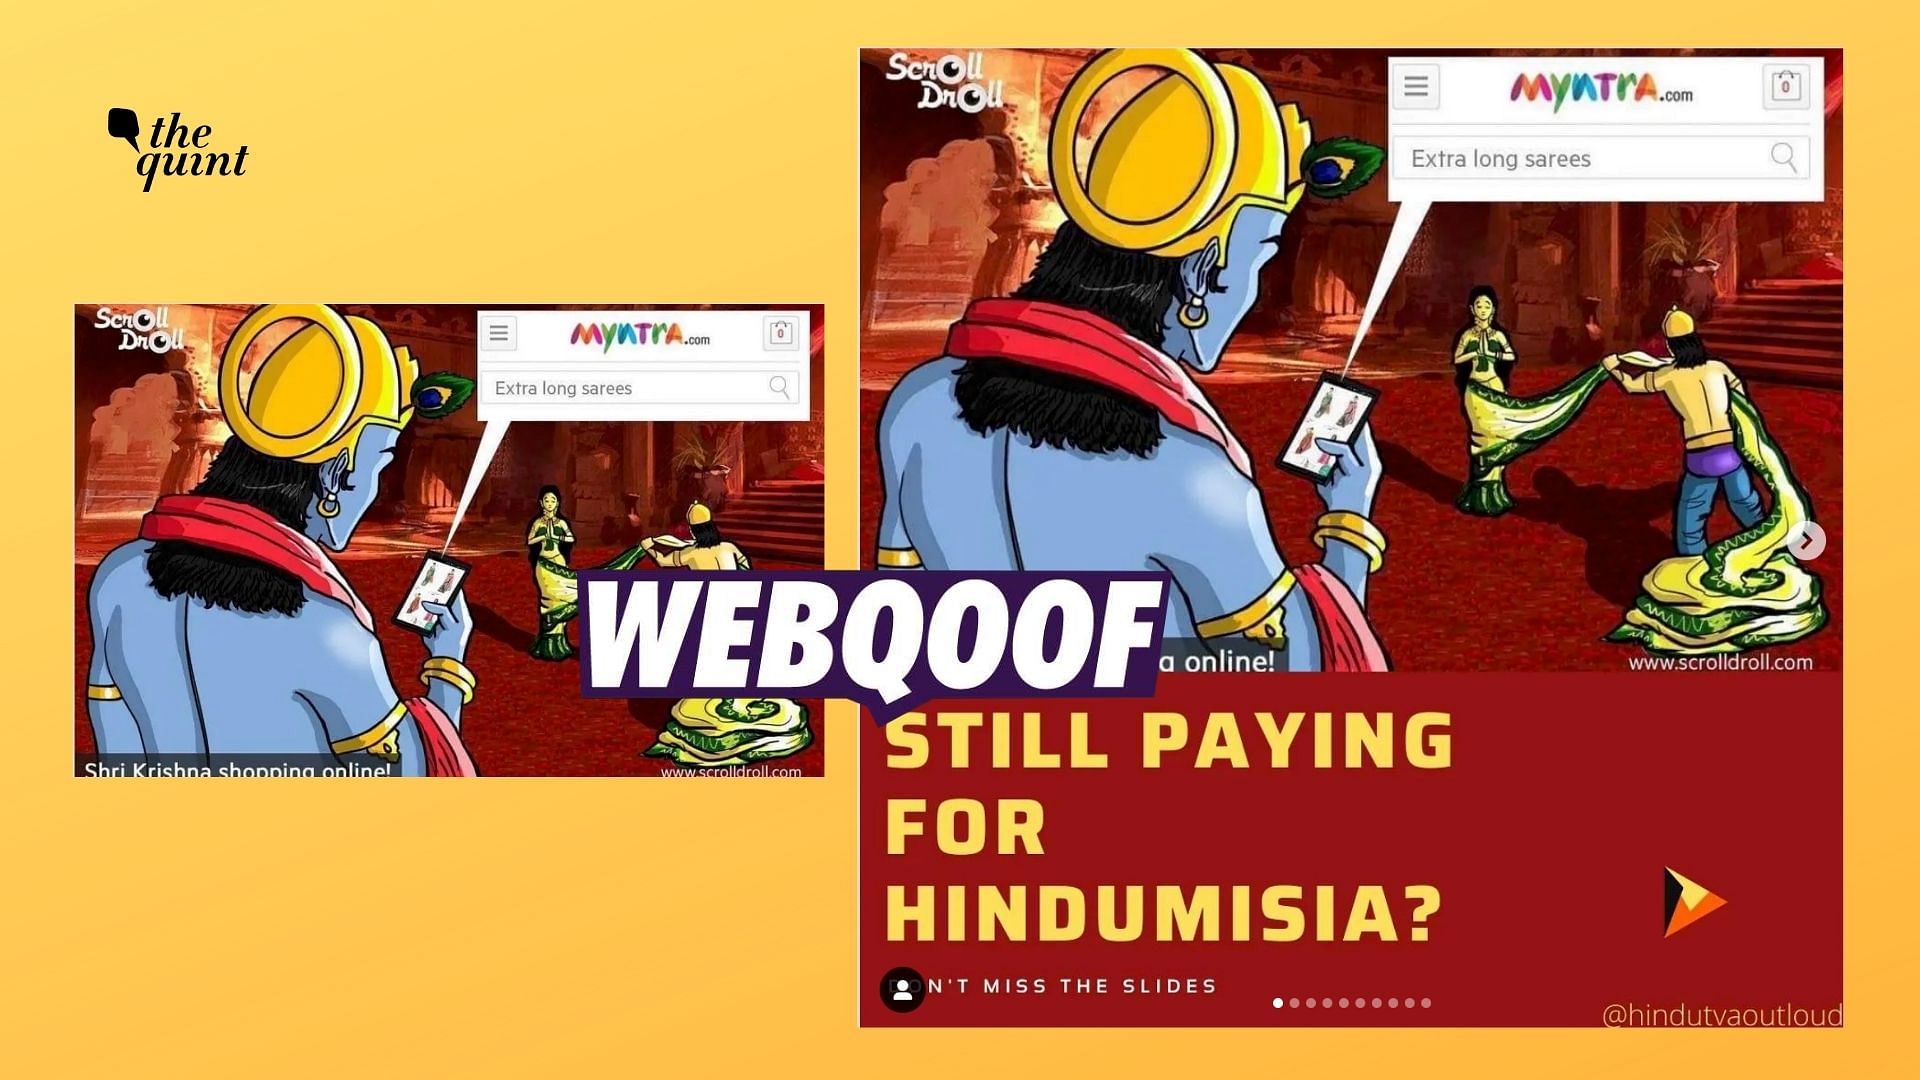 <div class="paragraphs"><p>The controversial graphic depicting Hindu mythological characters was created by&nbsp;<em>ScrollDroll</em>&nbsp;and not Myntra, who took it down in 2016.</p></div>